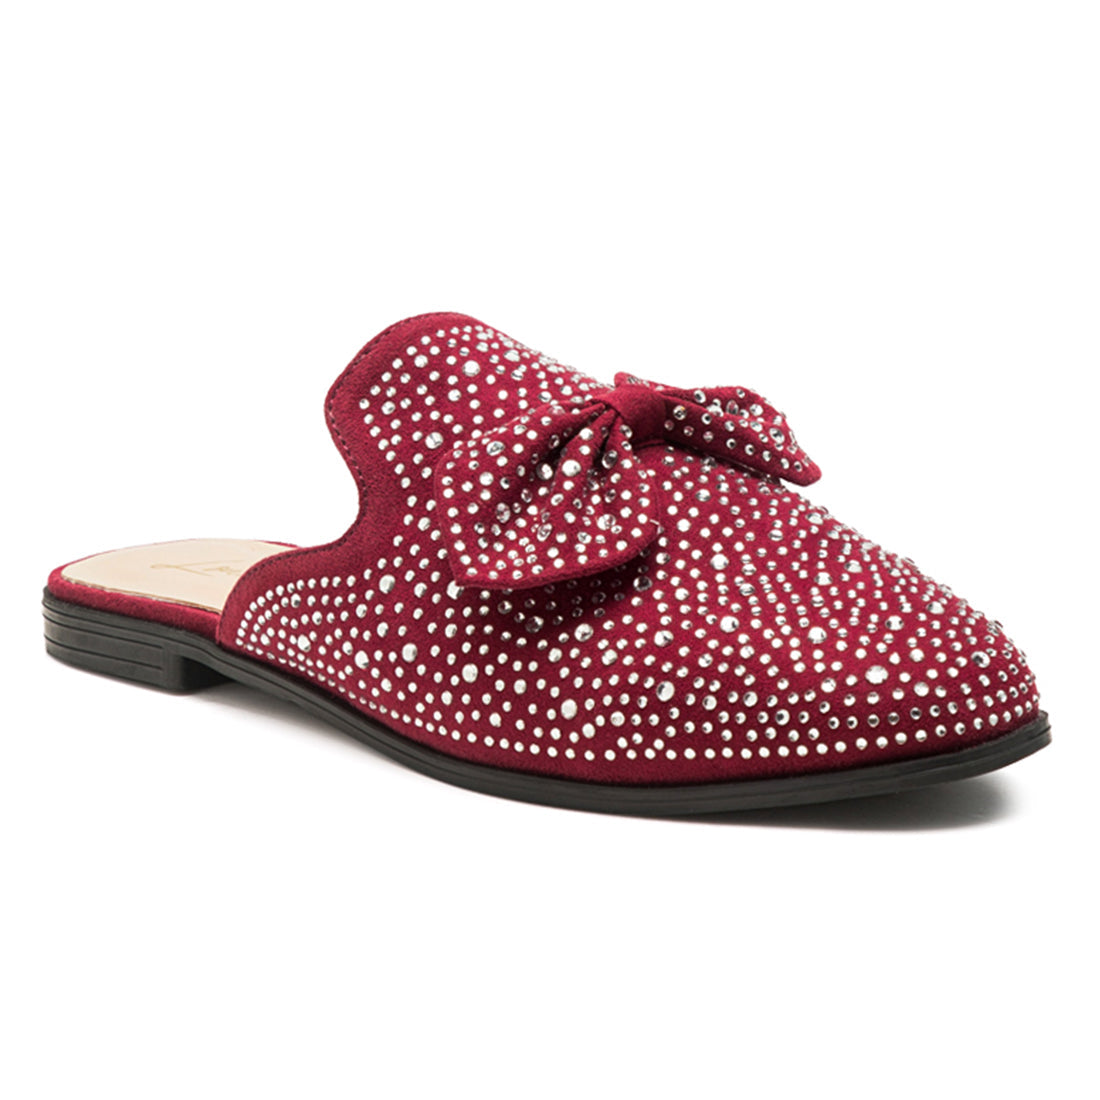 Embellished Casual Bow Mules in Burgundy - Burgundy